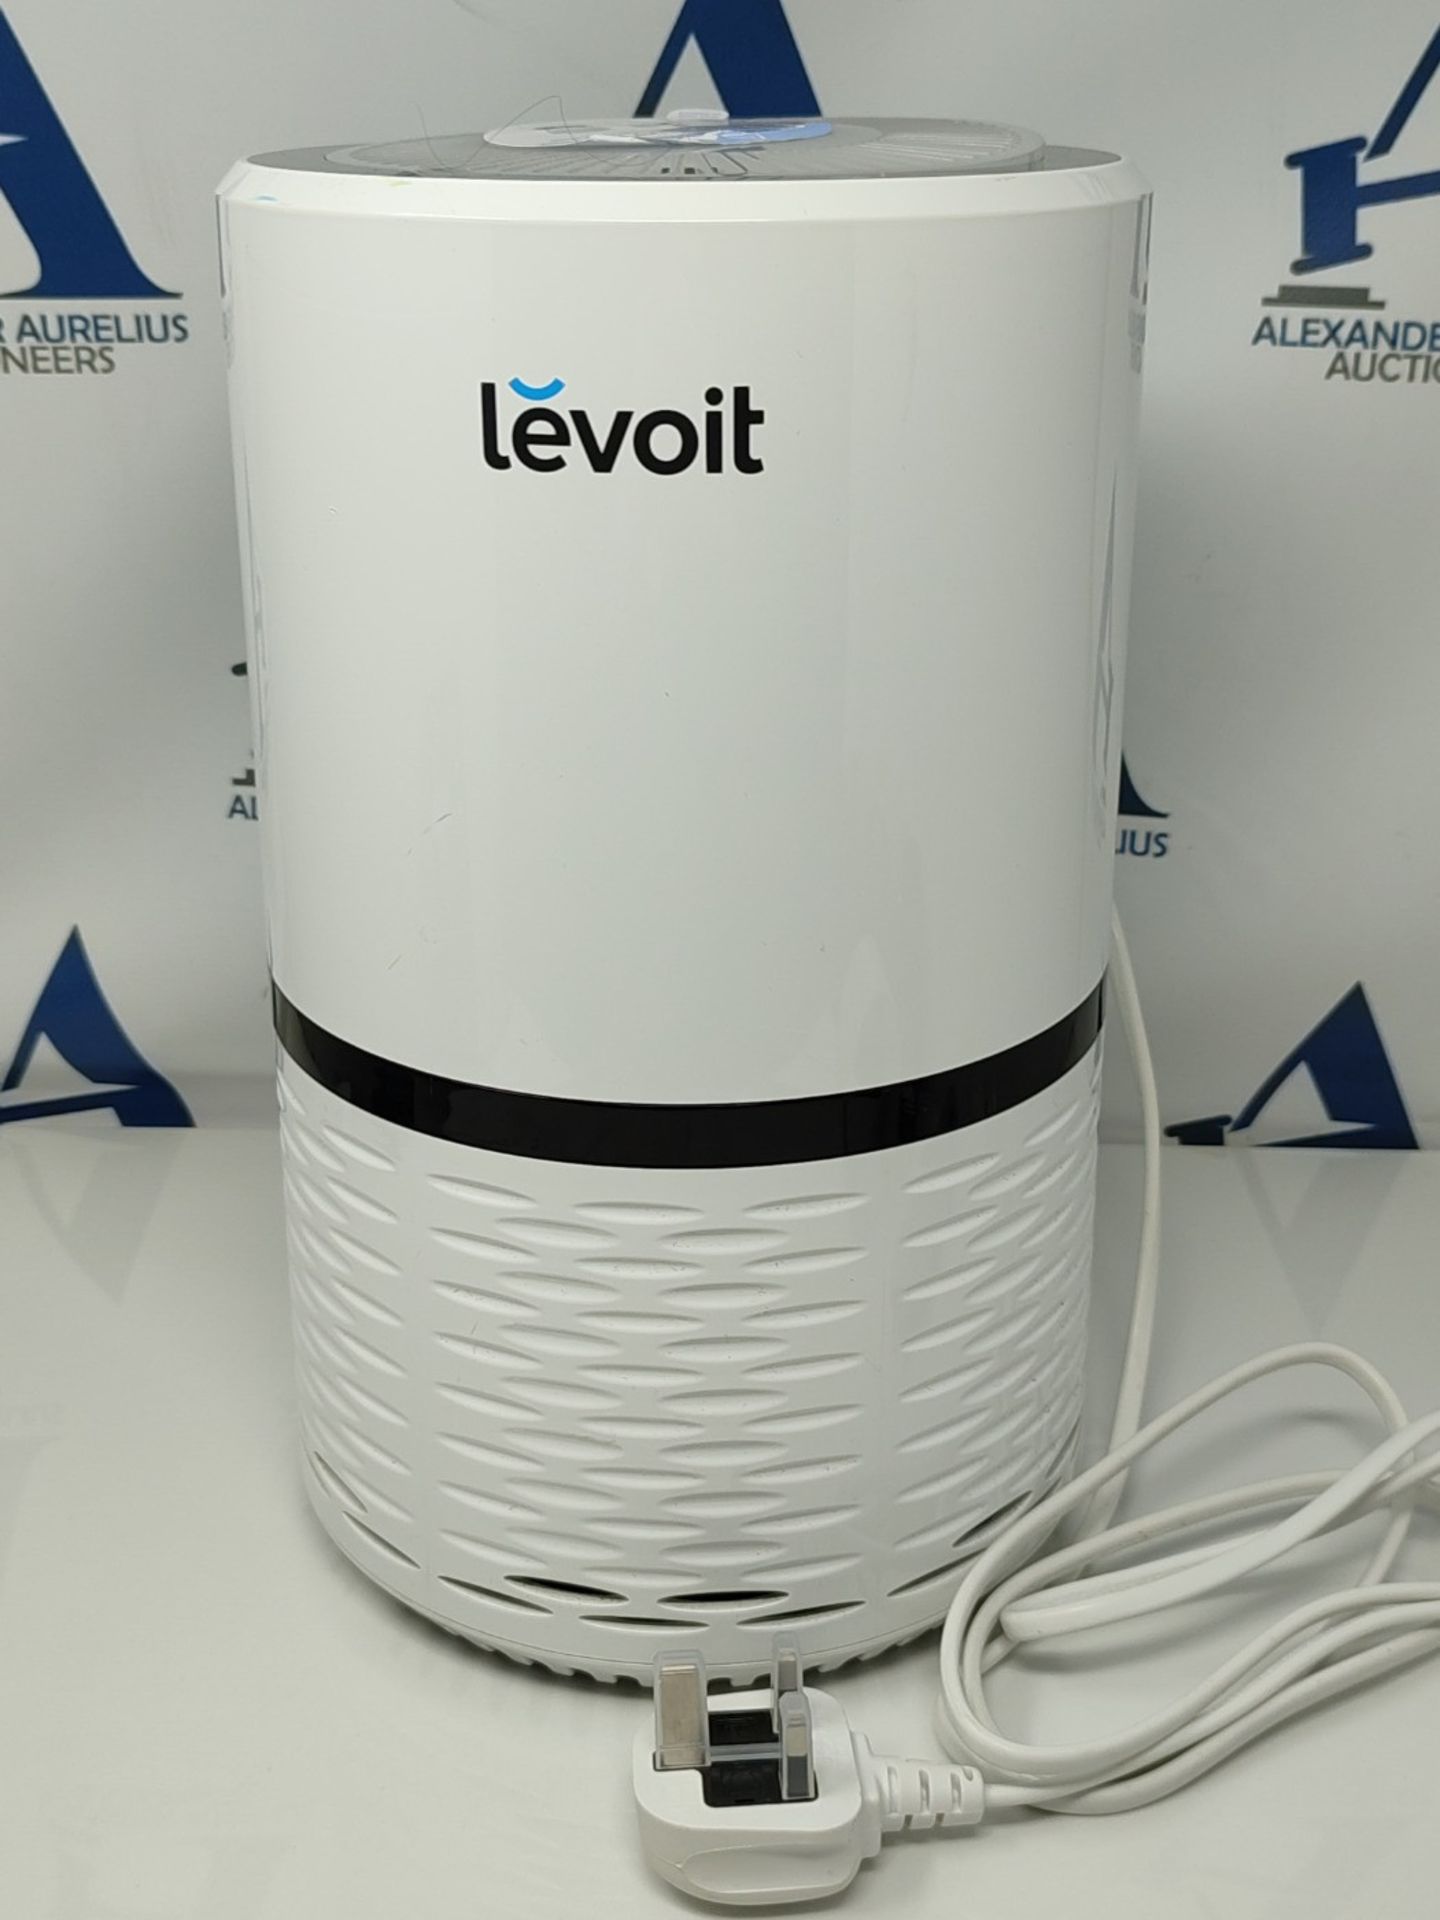 RRP £79.00 Levoit Air Purifier for Home, Quiet H13 HEPA Filter Removes Pollen, Allergy Particles, - Image 3 of 3